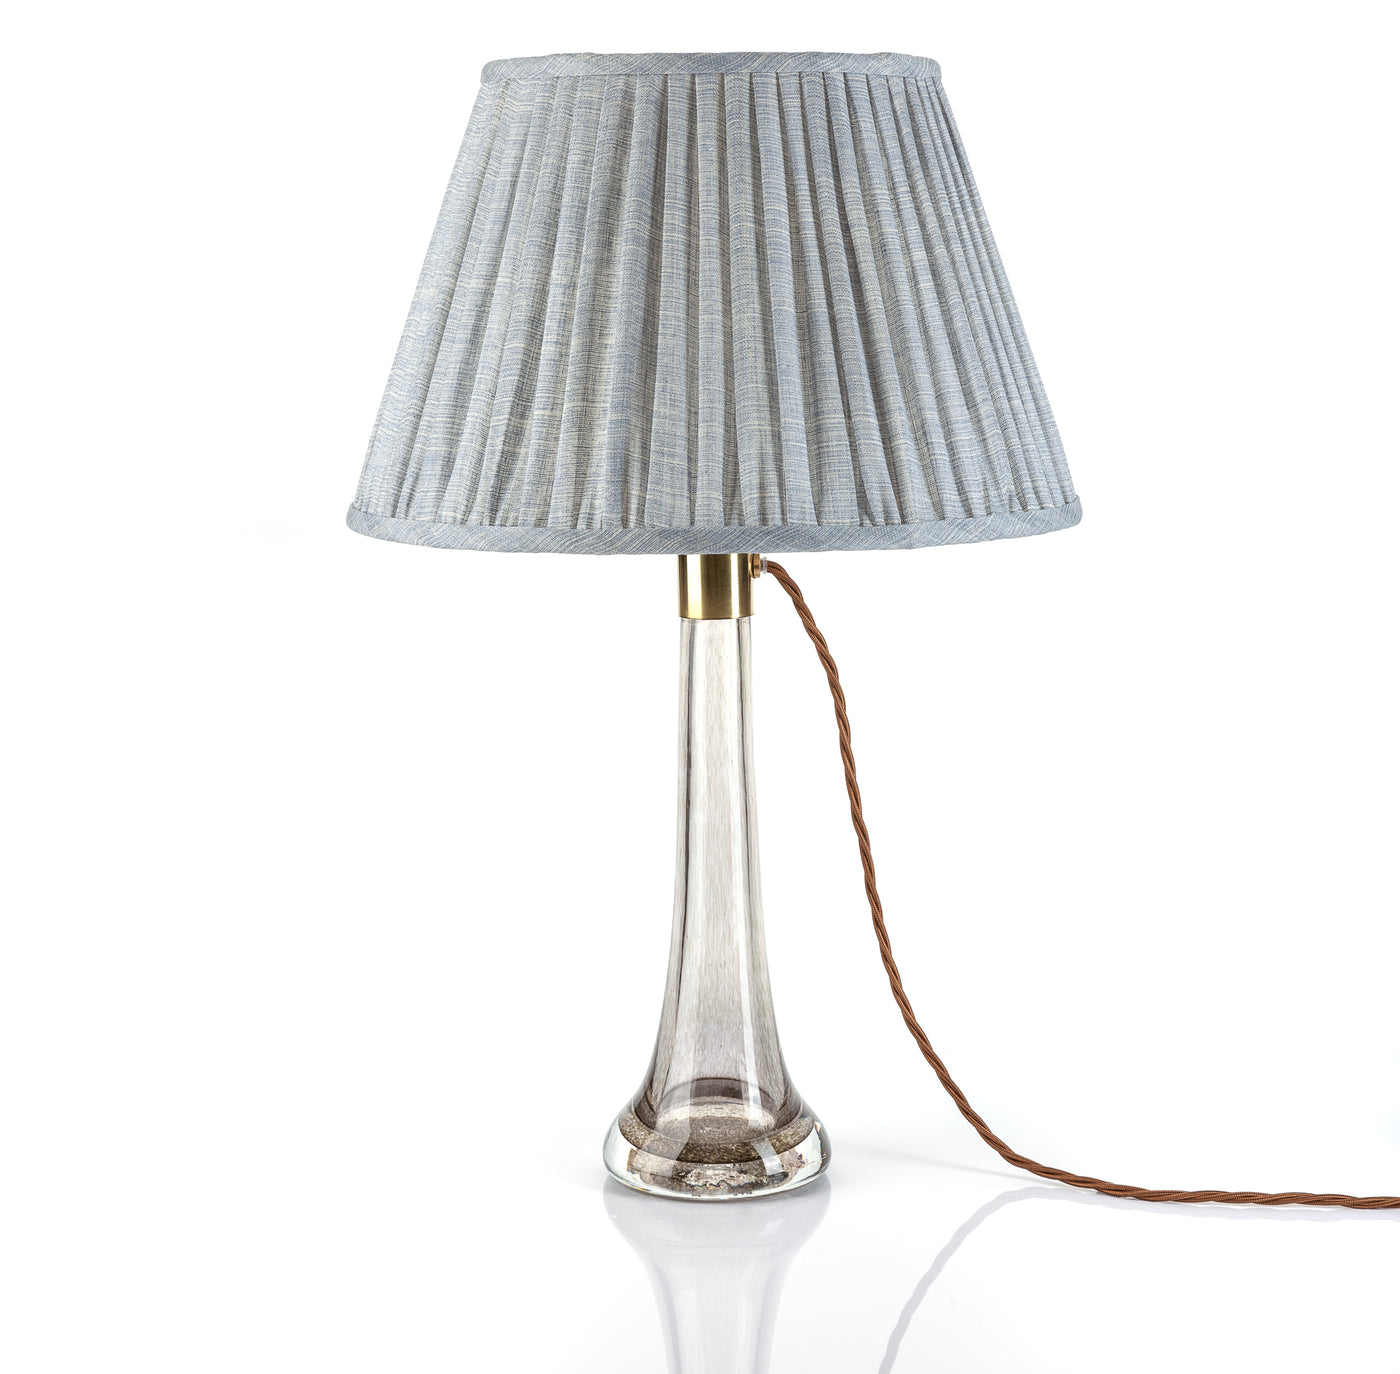 Fermoie Lampshade - Moire Linen in Blue  | Newport Lamp And Shade | Located in Newport, RI